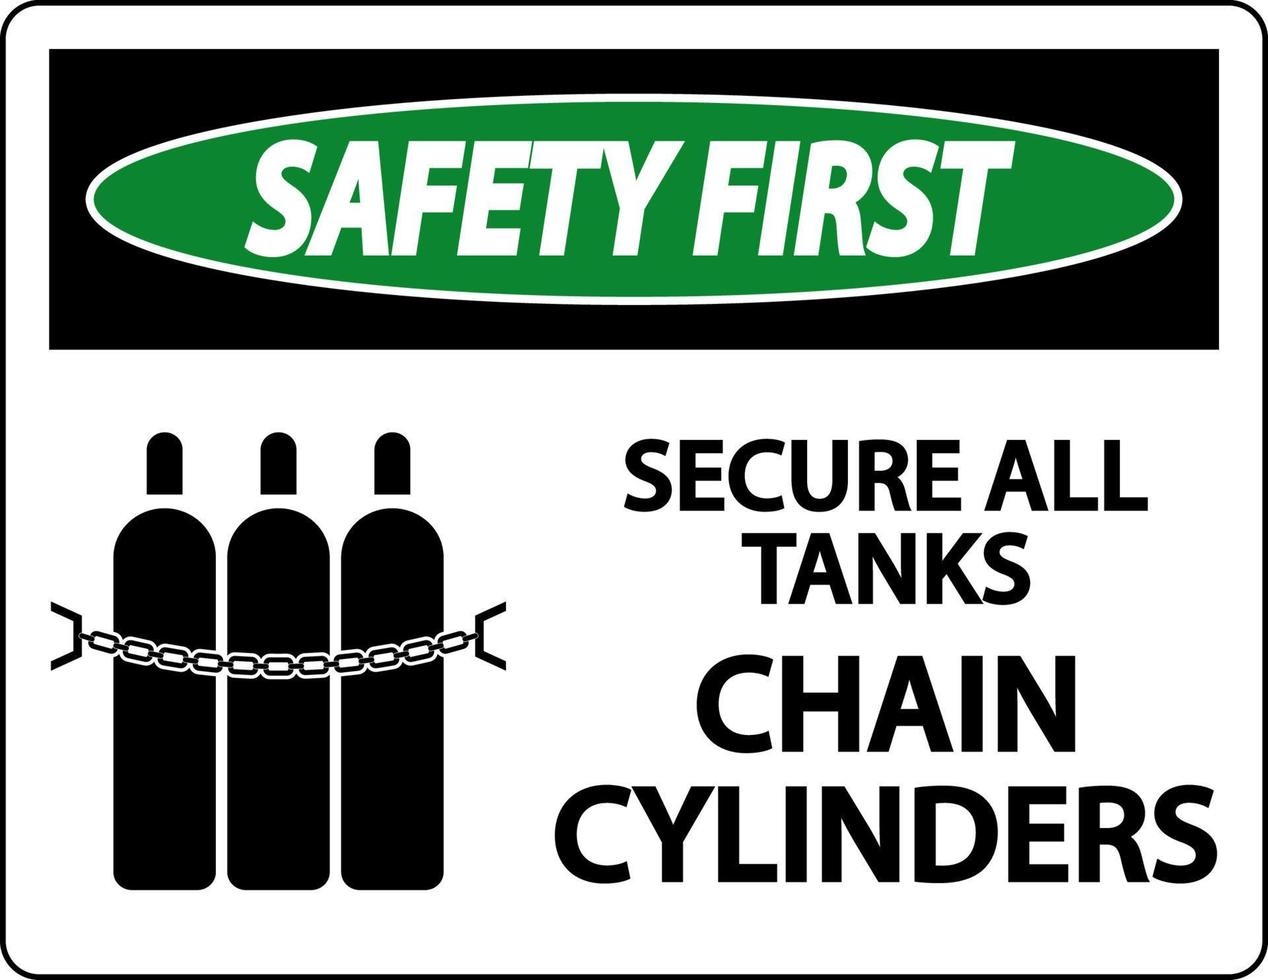 Safety First Sign Secure All Tanks, Chain Cylinders vector